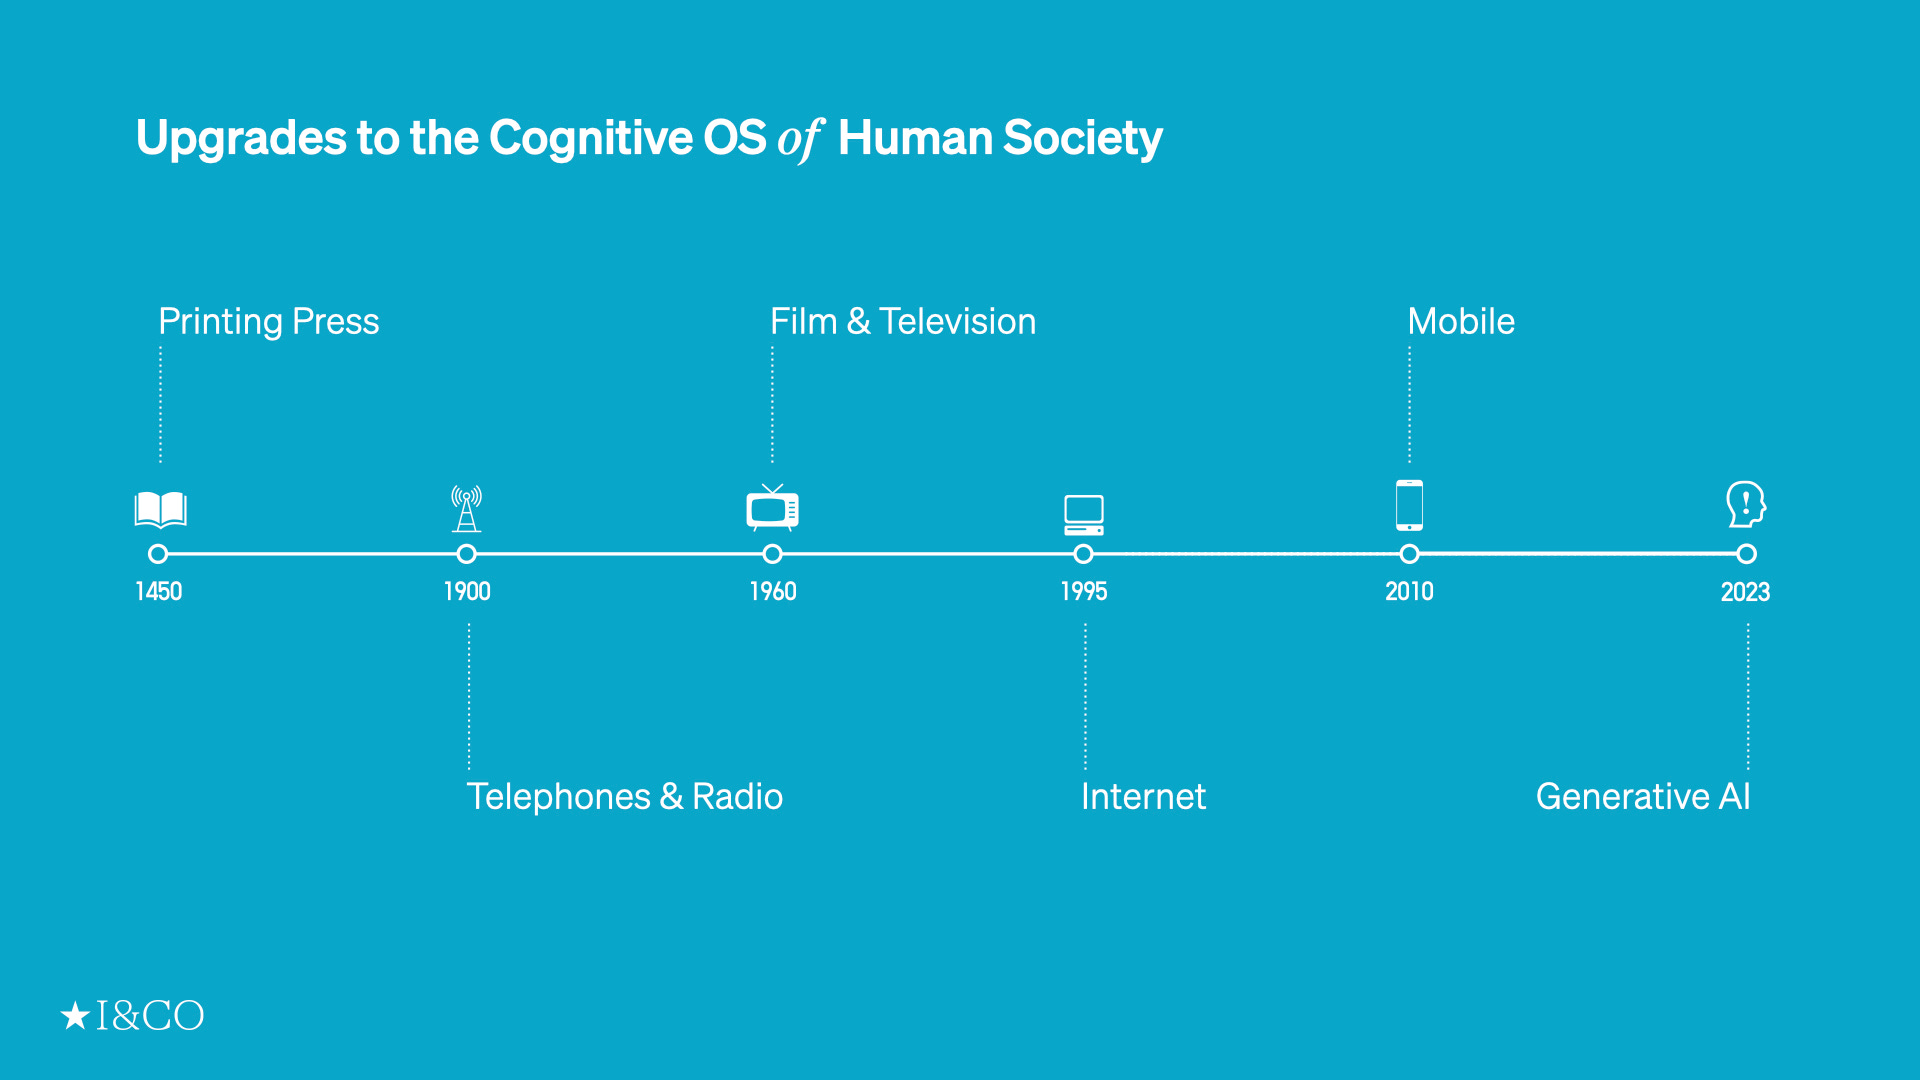 Upgrades to the Cognitive OS of Human Society